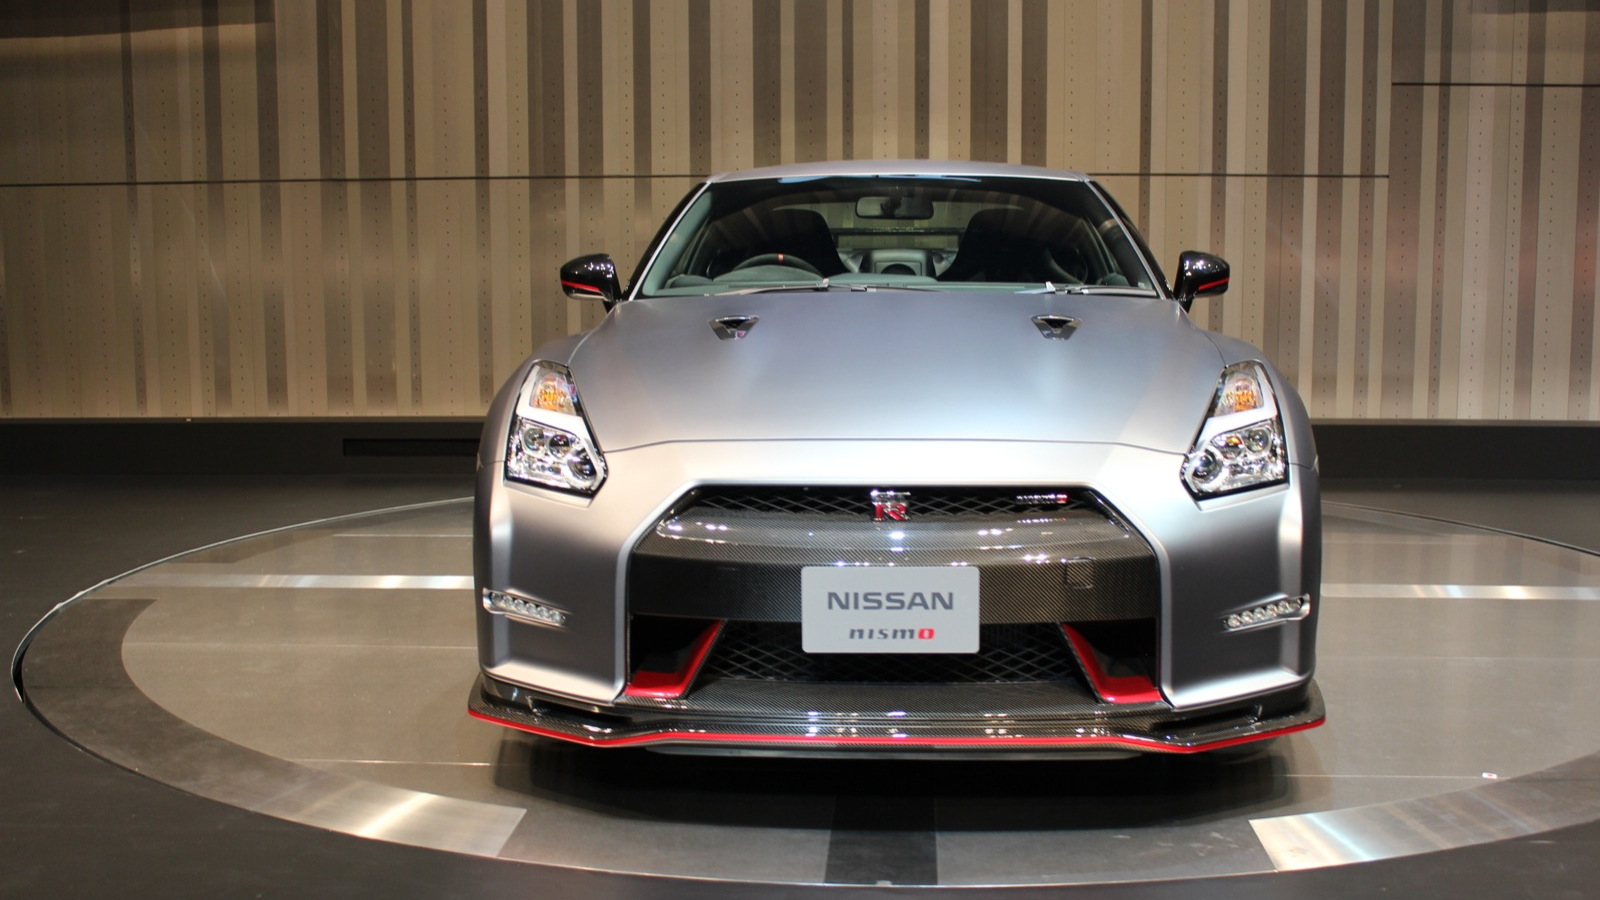 2015 Nissan GT-R NISMO  -  2013 Tokyo Motor Show preview event, Nissan Global Headquarters